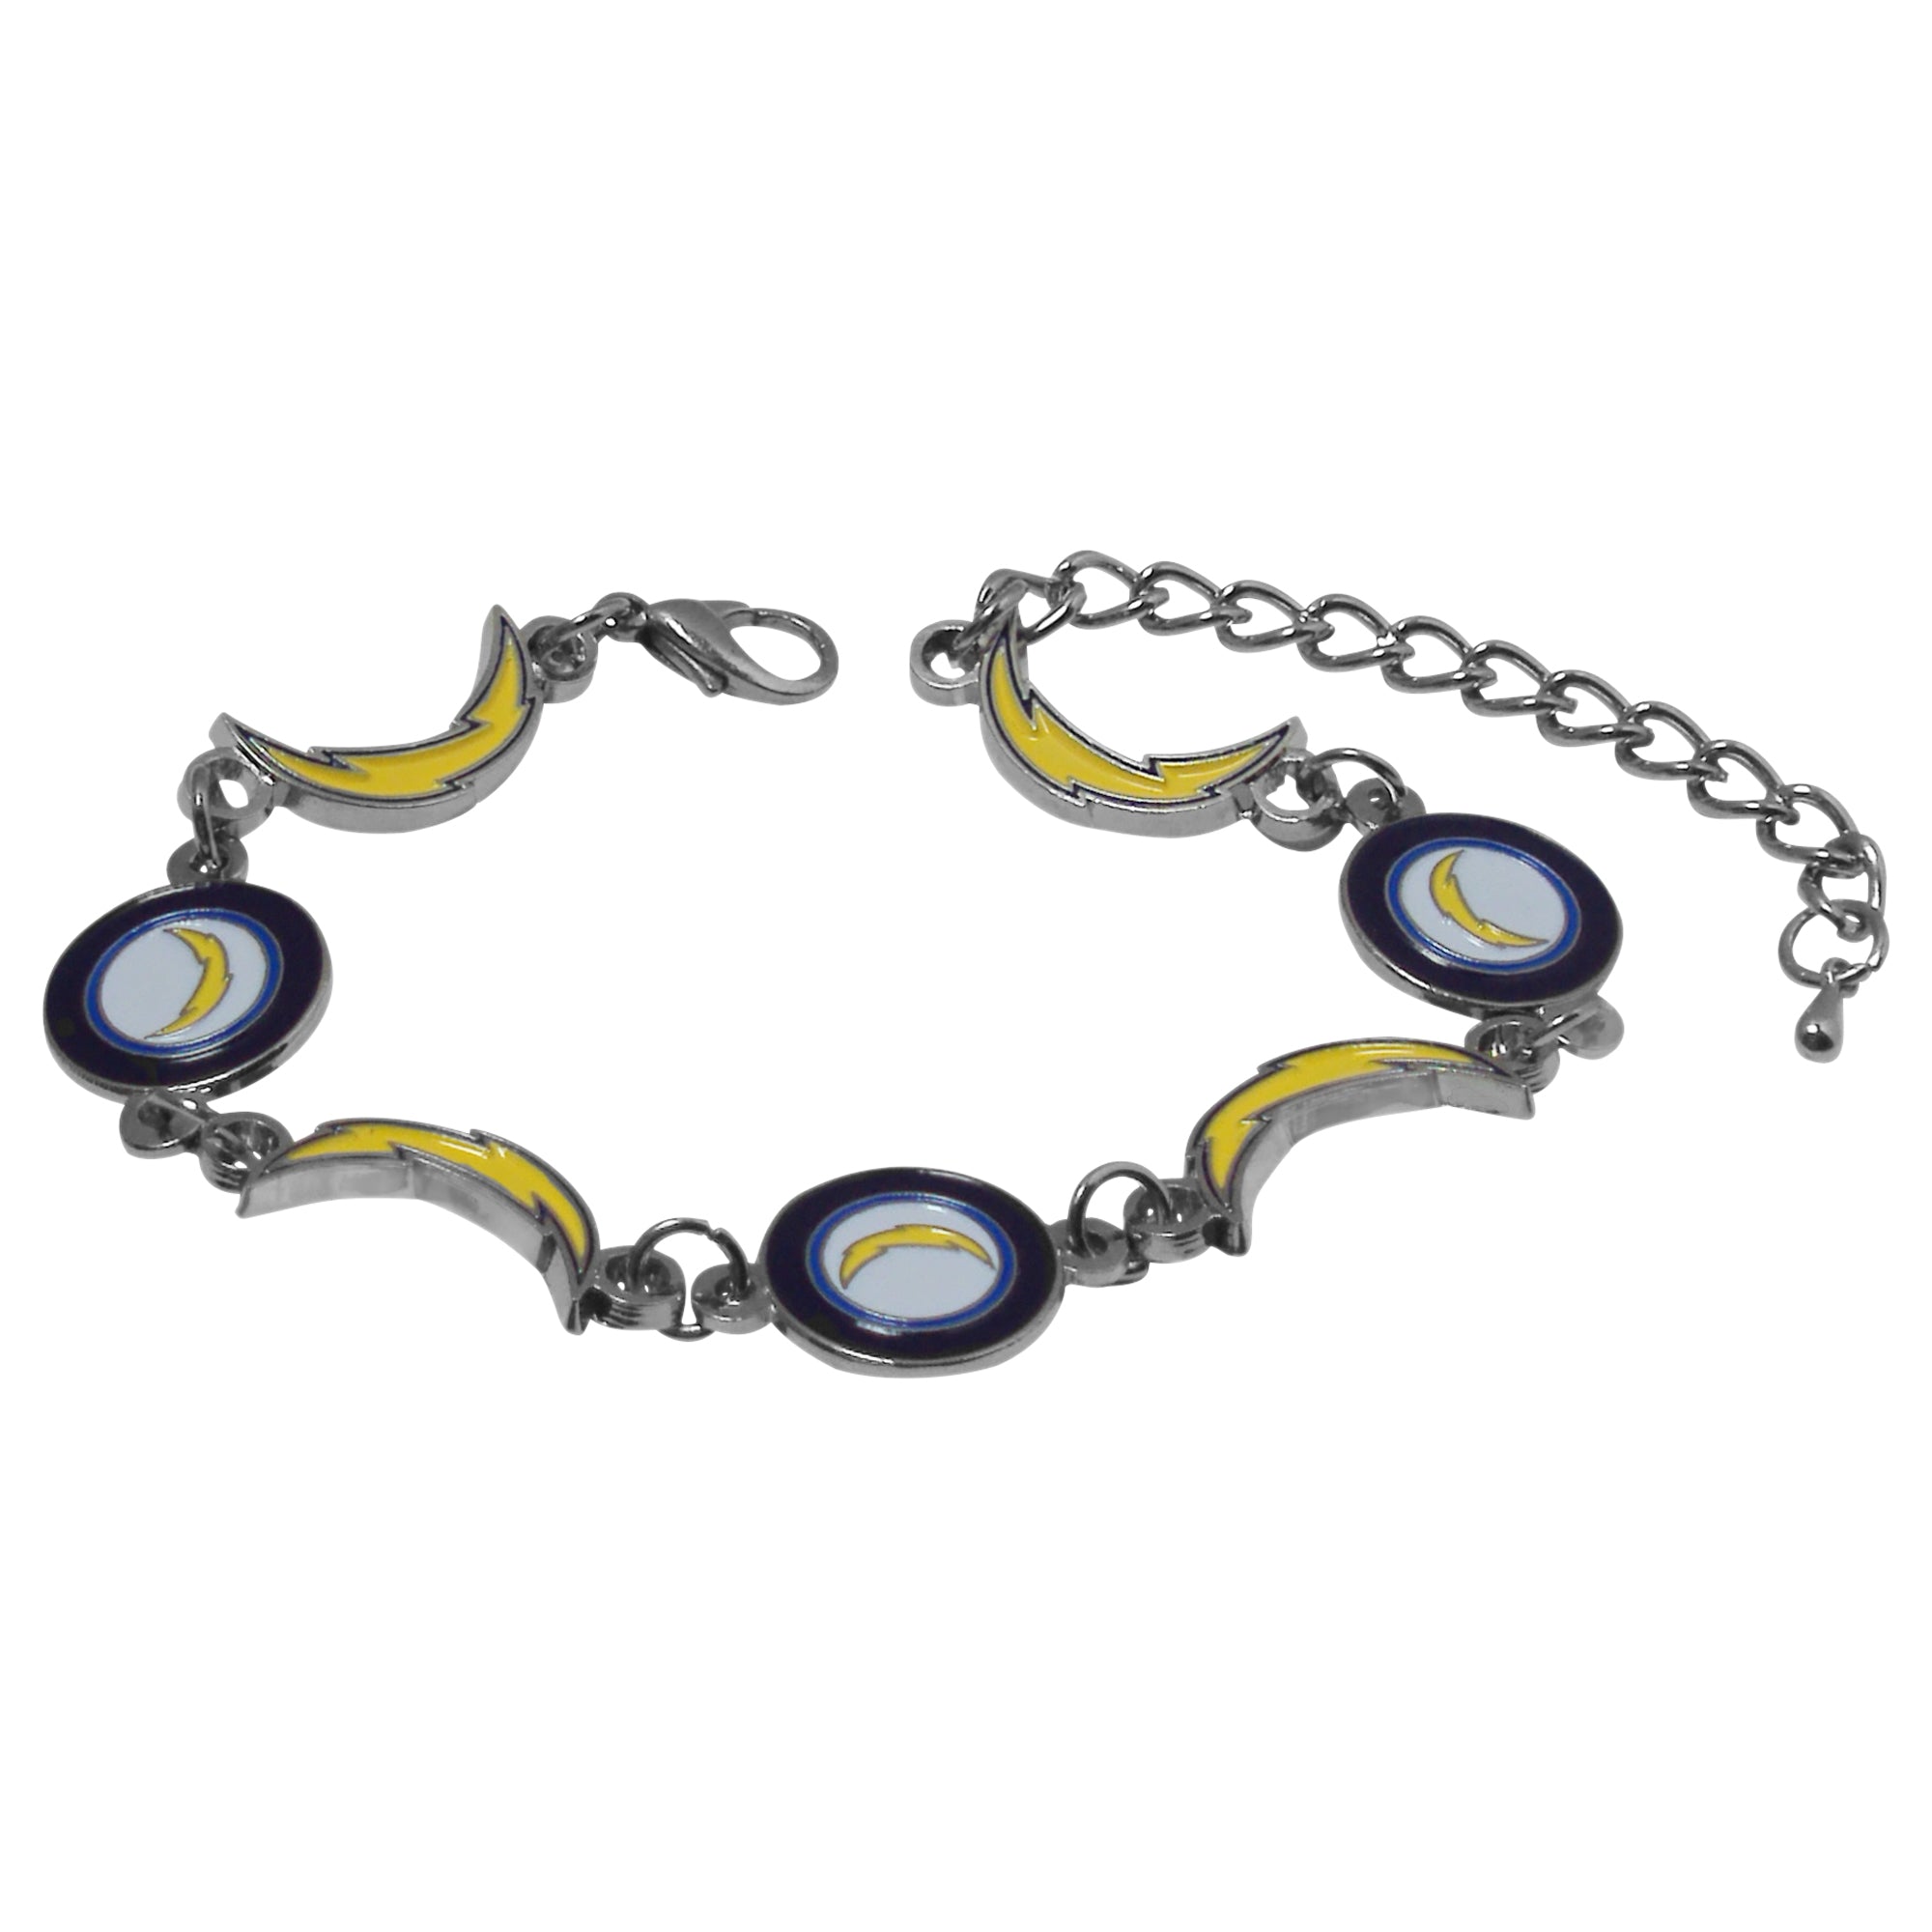 Officially Licensed NFL Stainless Steel Bracelet - San Diego Chargers